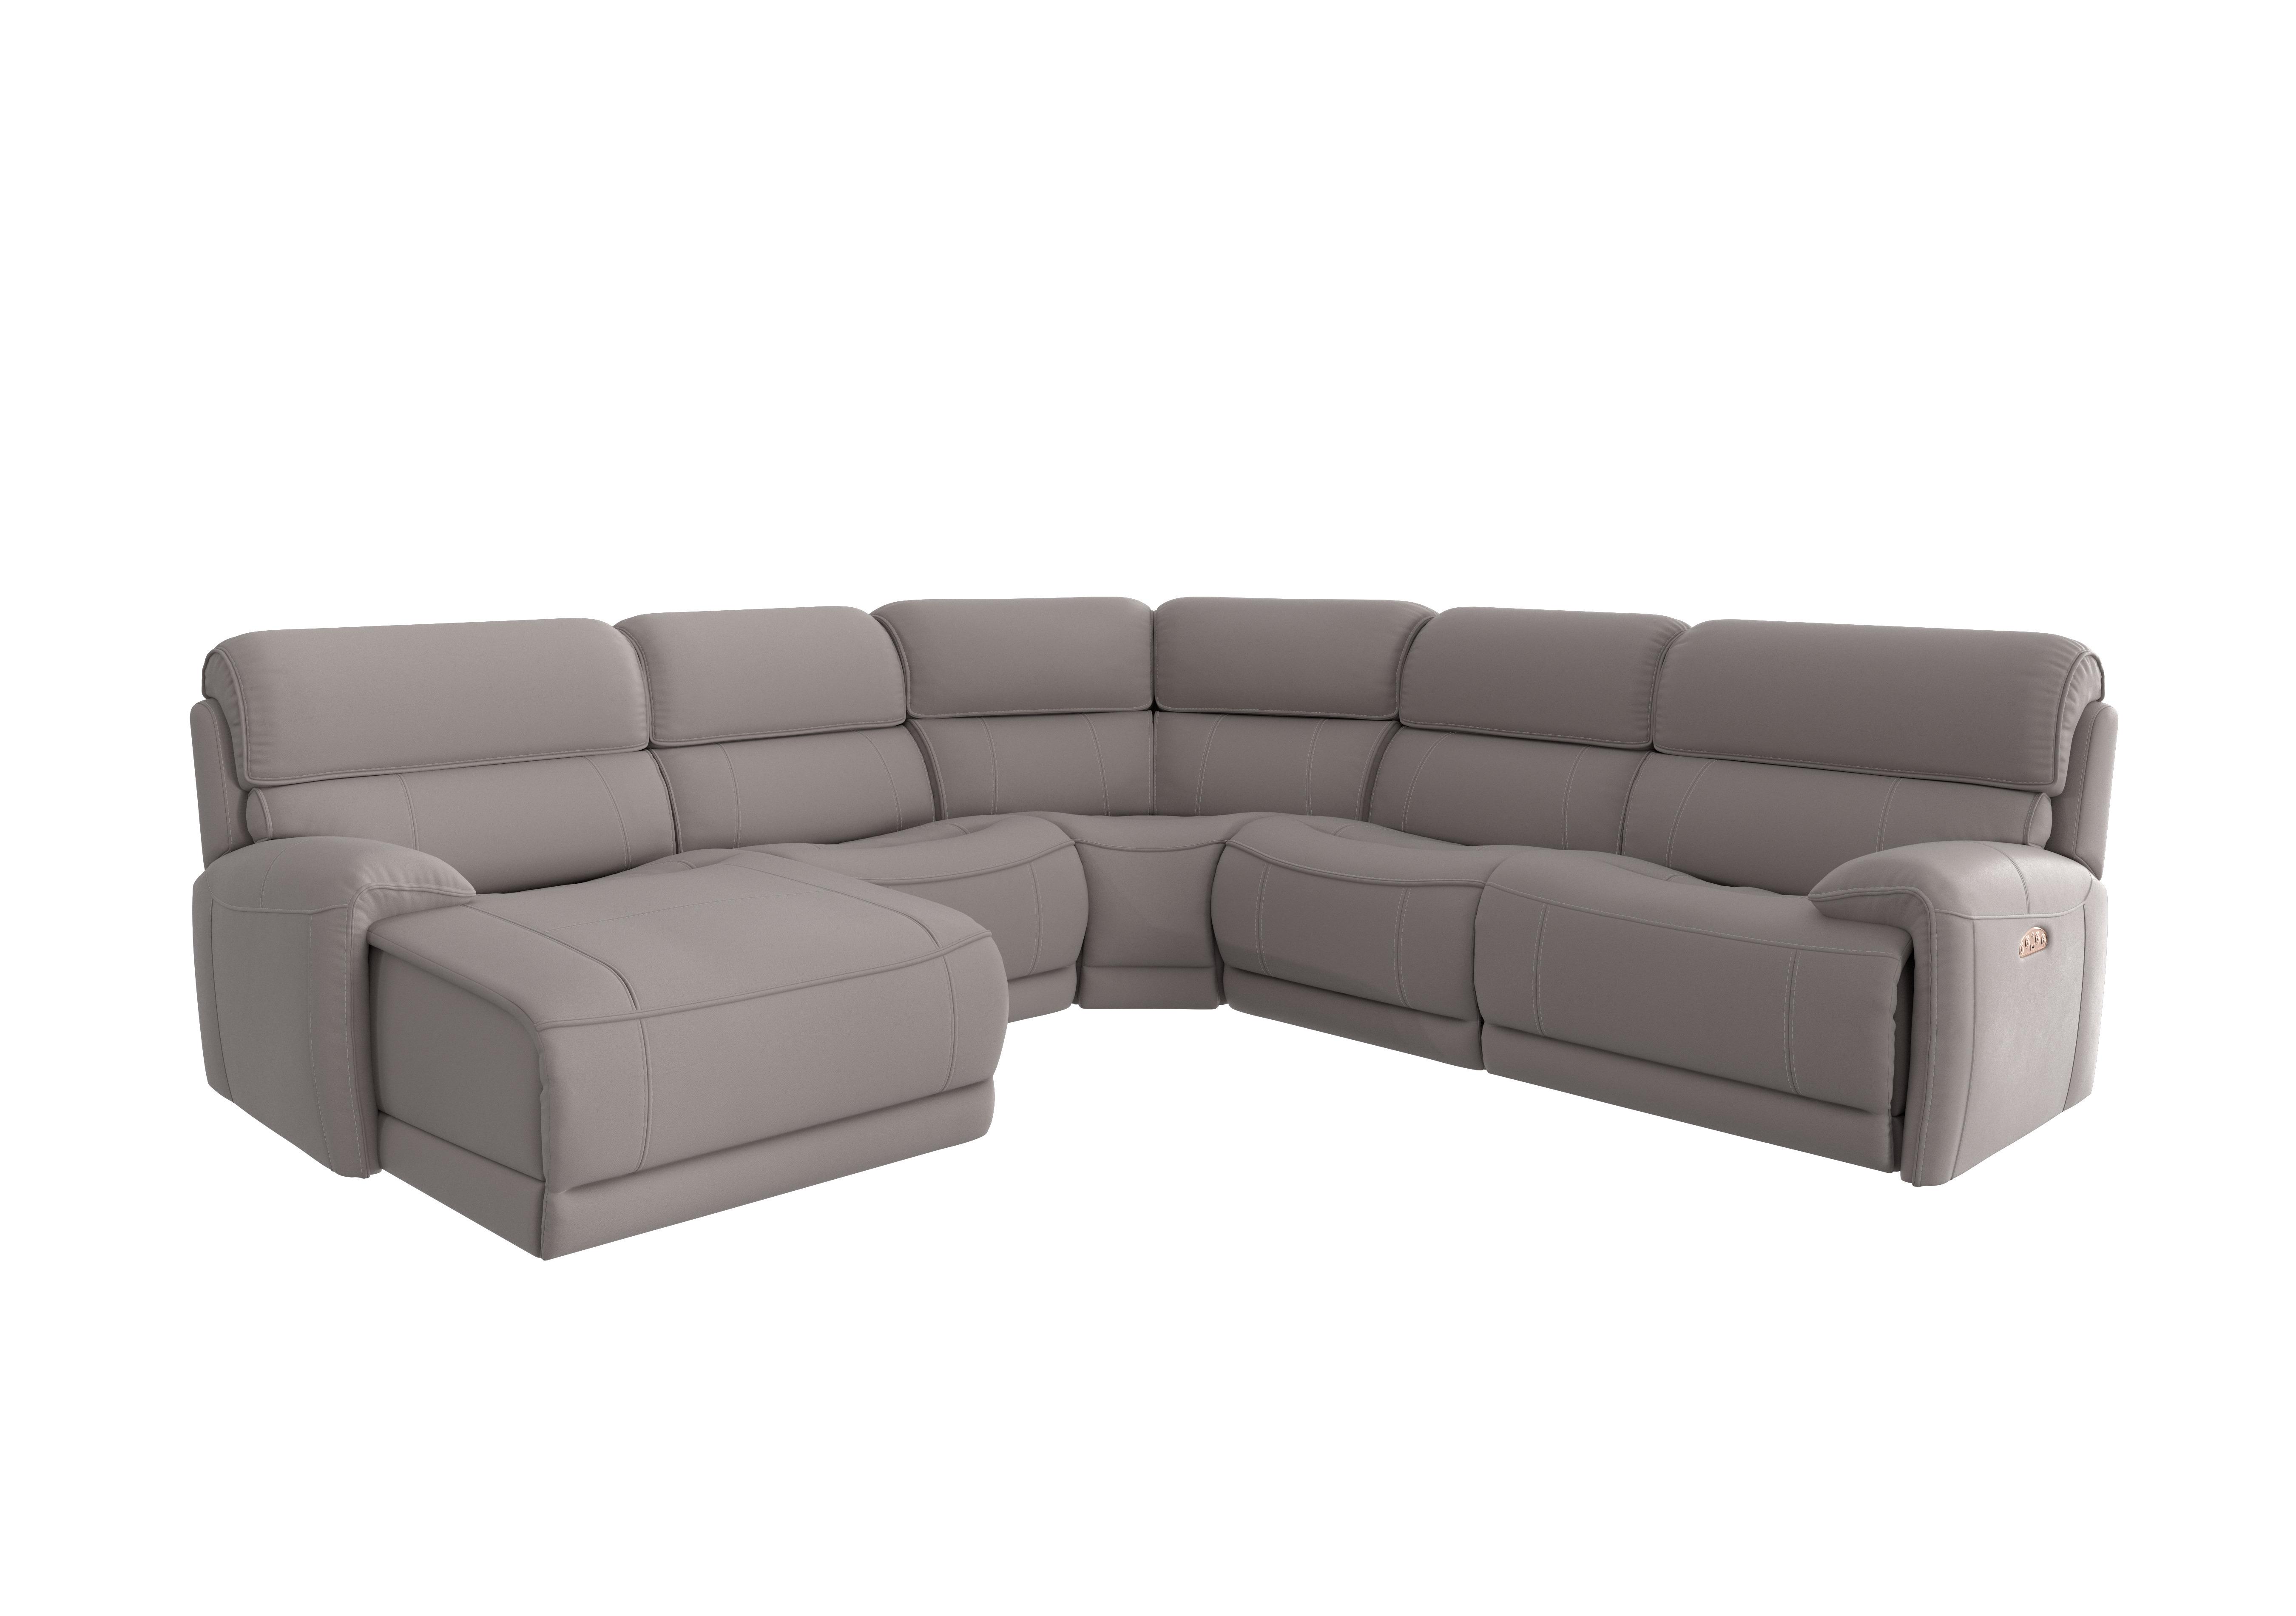 Link Fabric Corner Chaise Power Sofa in Bfa-Mad-R02 Feather on Furniture Village